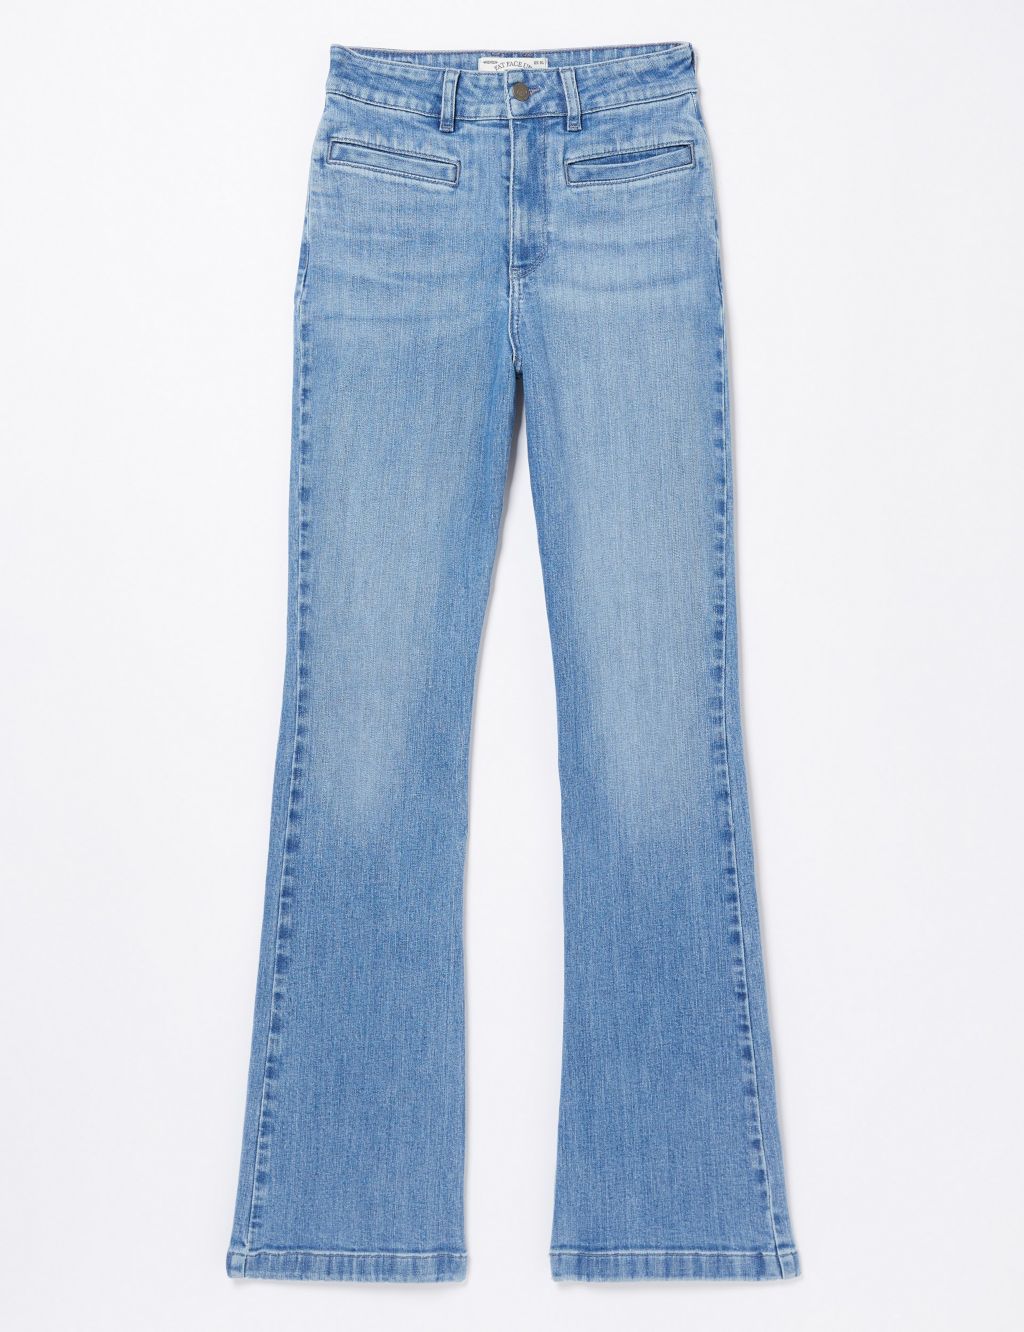 Flared Jeans image 2